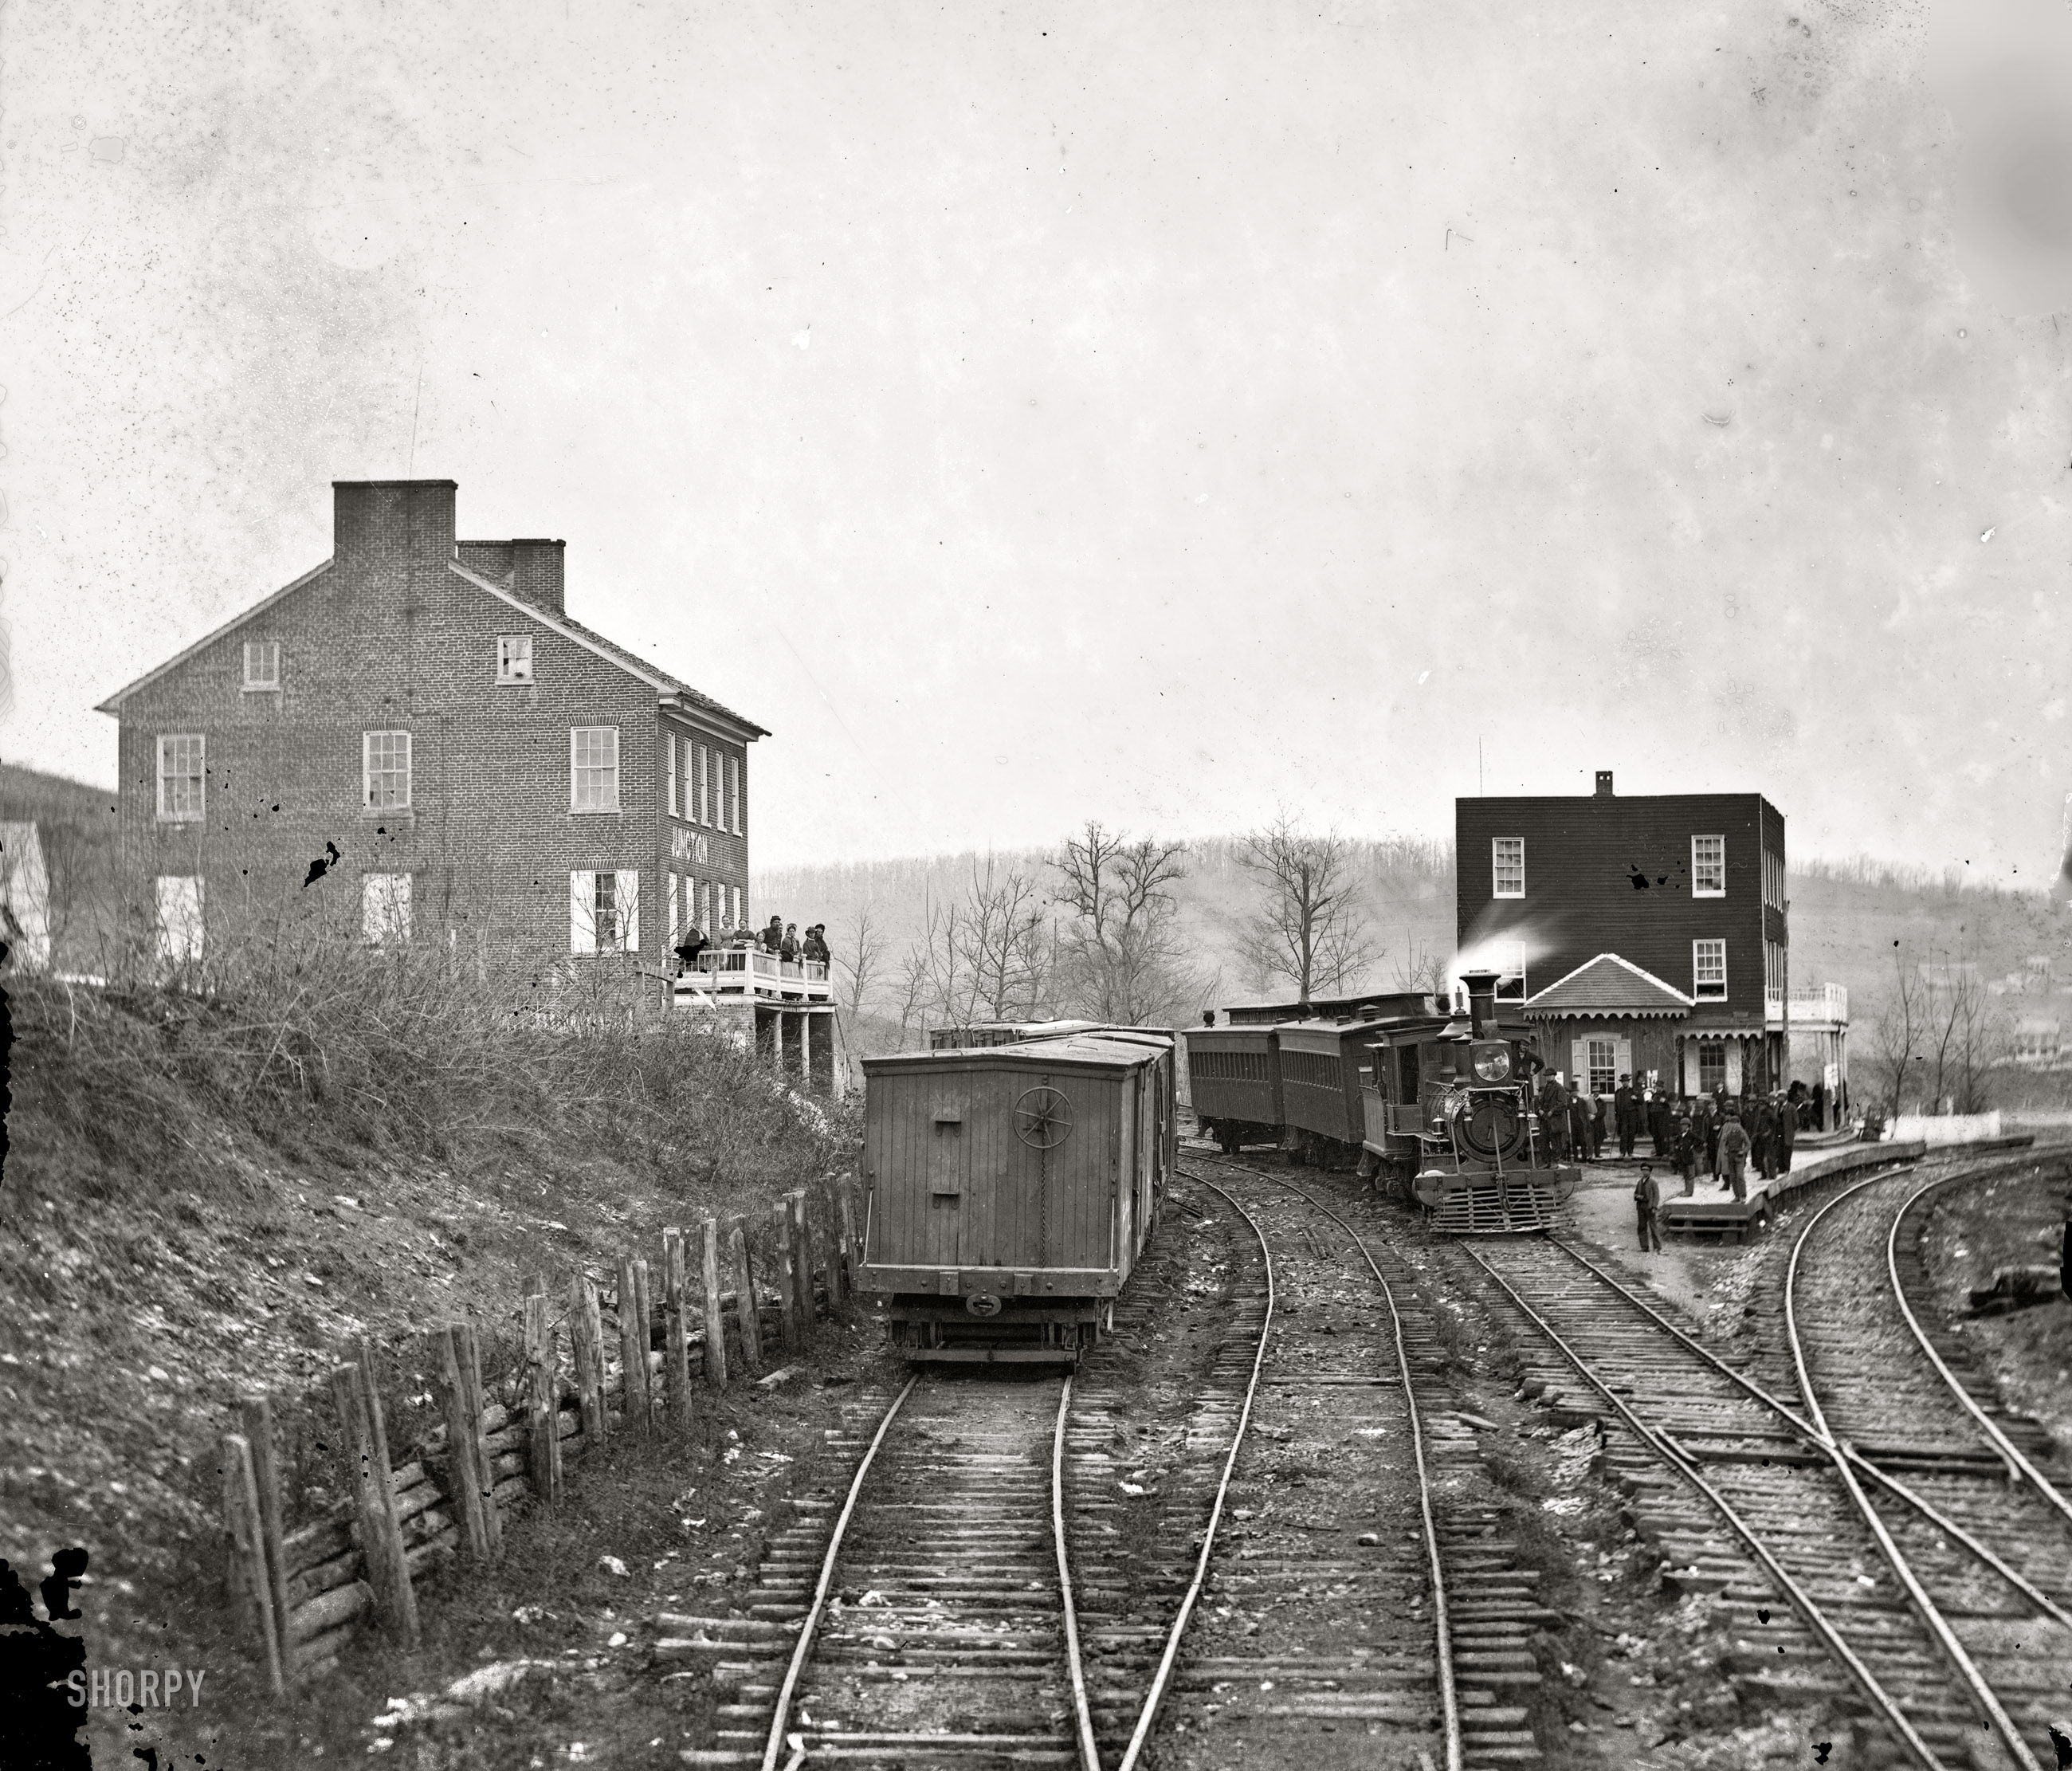 1863. "Hanover Junction, Pennsylvania. Passenger train at depot." From photographs of the main Eastern theater of war, Gettysburg, June-July 1863. Wet plate glass negative by Mathew Brady or his assistant. View full size.